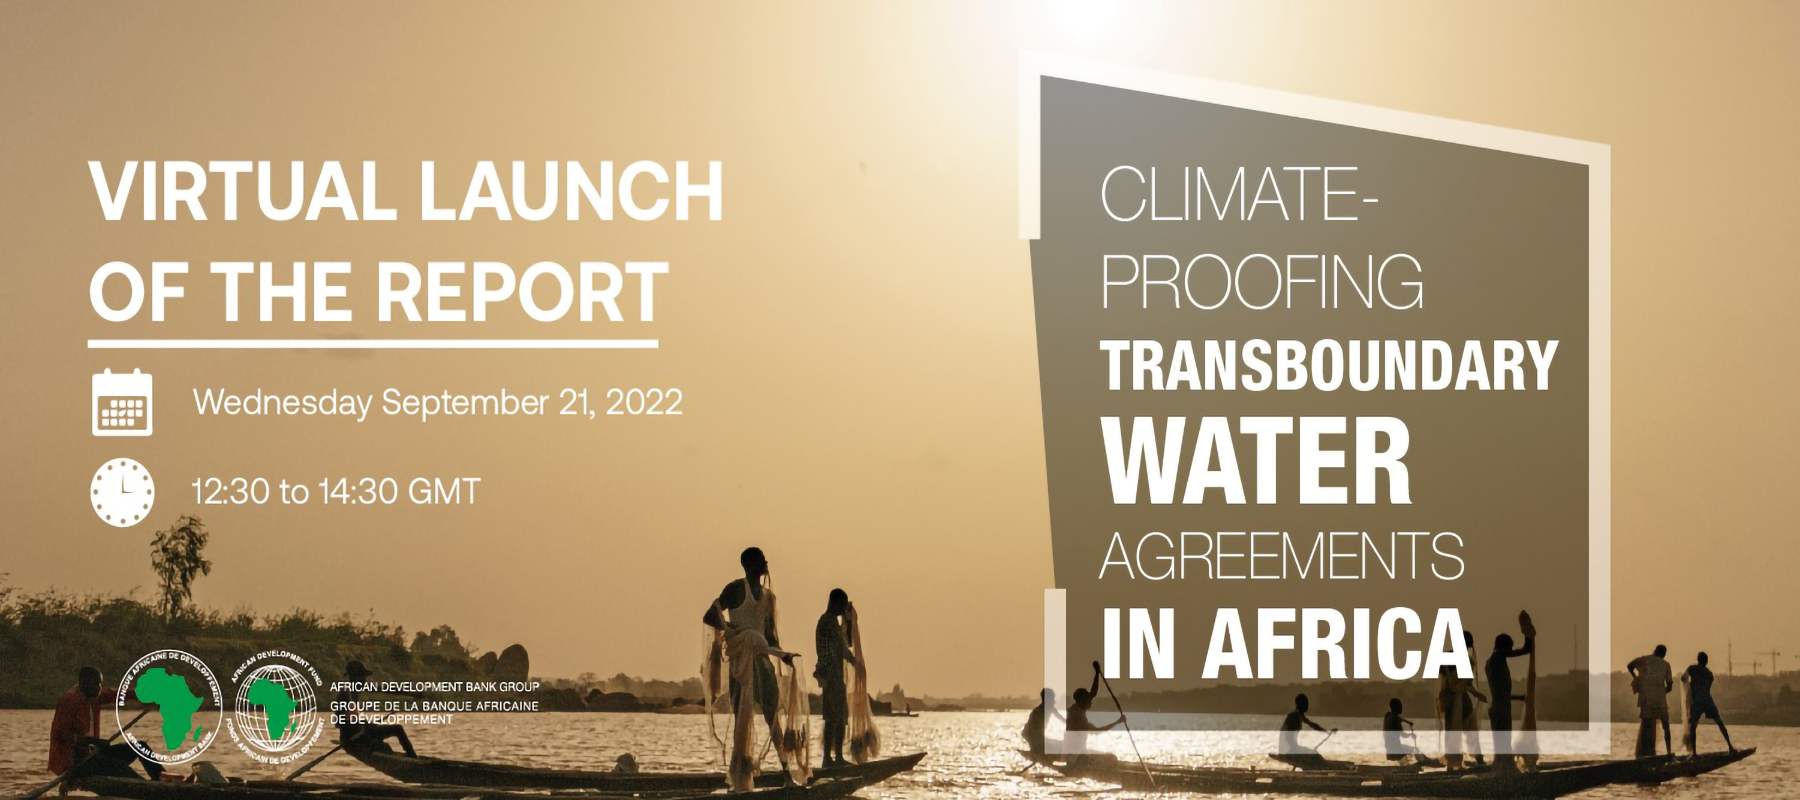 Webinar: Launch of the Climate-proofing Transboundary Water Agreements in Africa report